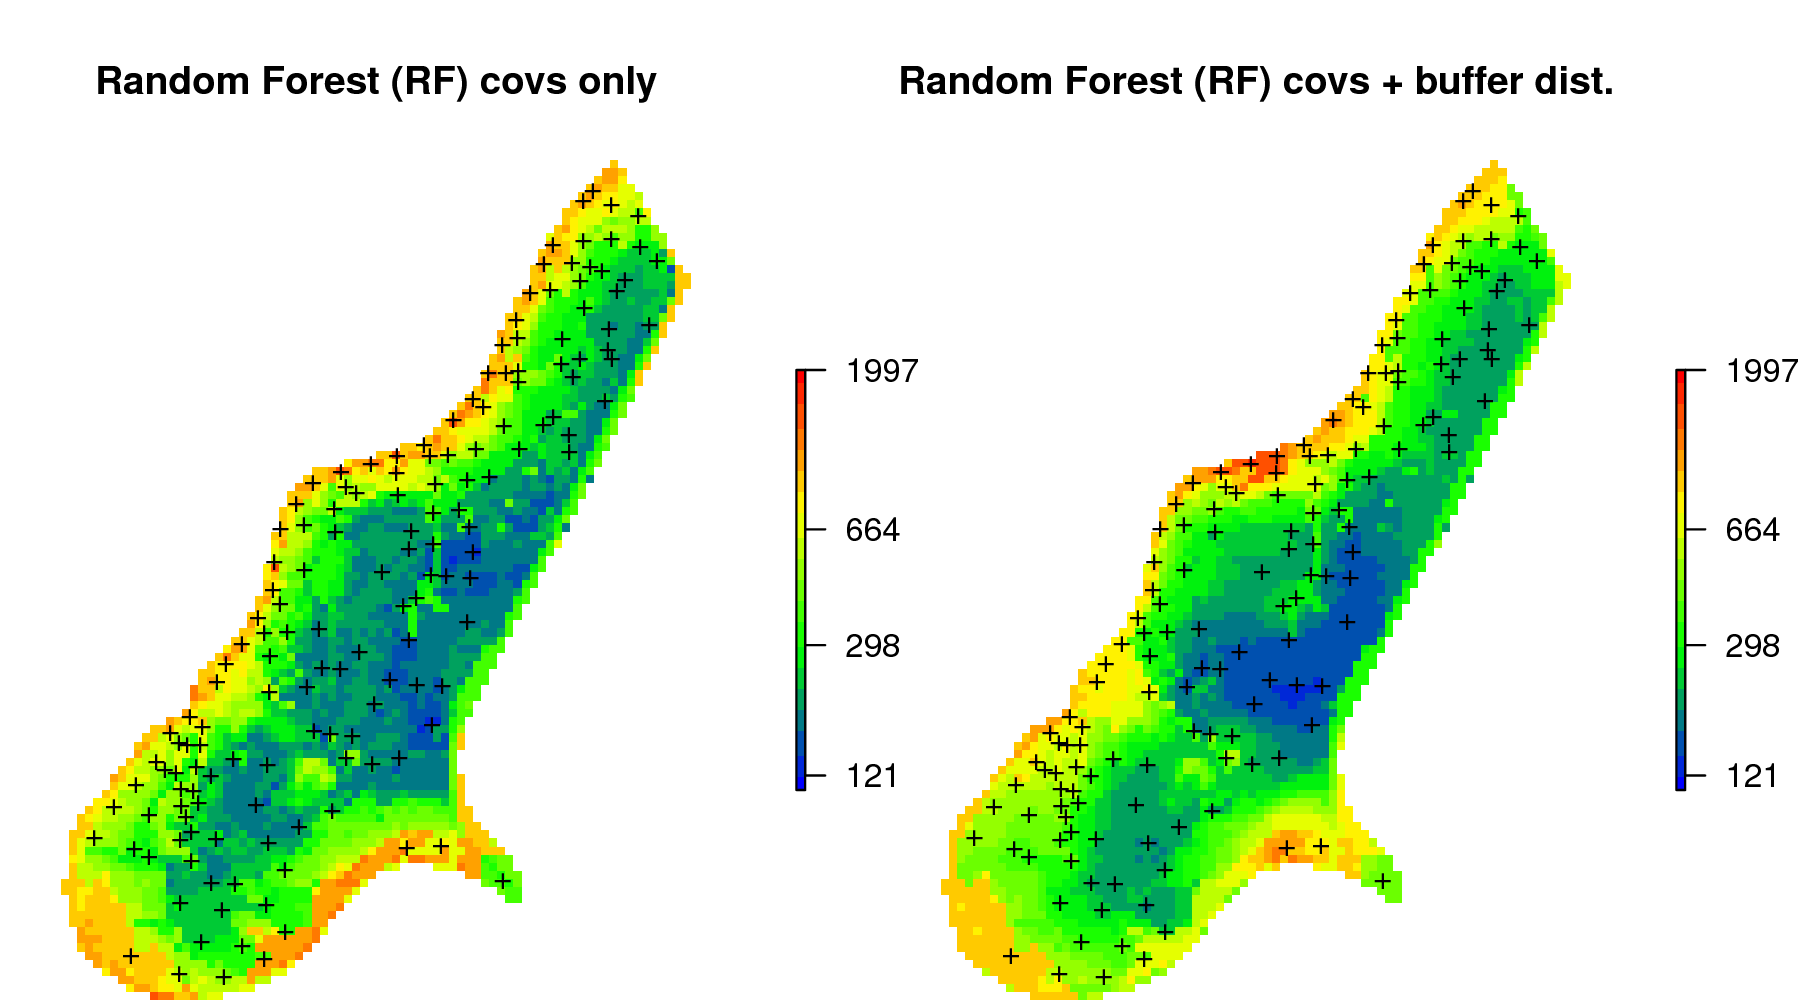 Comparison of predictions (median values) produced using random forest and covariates only (left), and random forest with combined covariates and buffer distances (right).